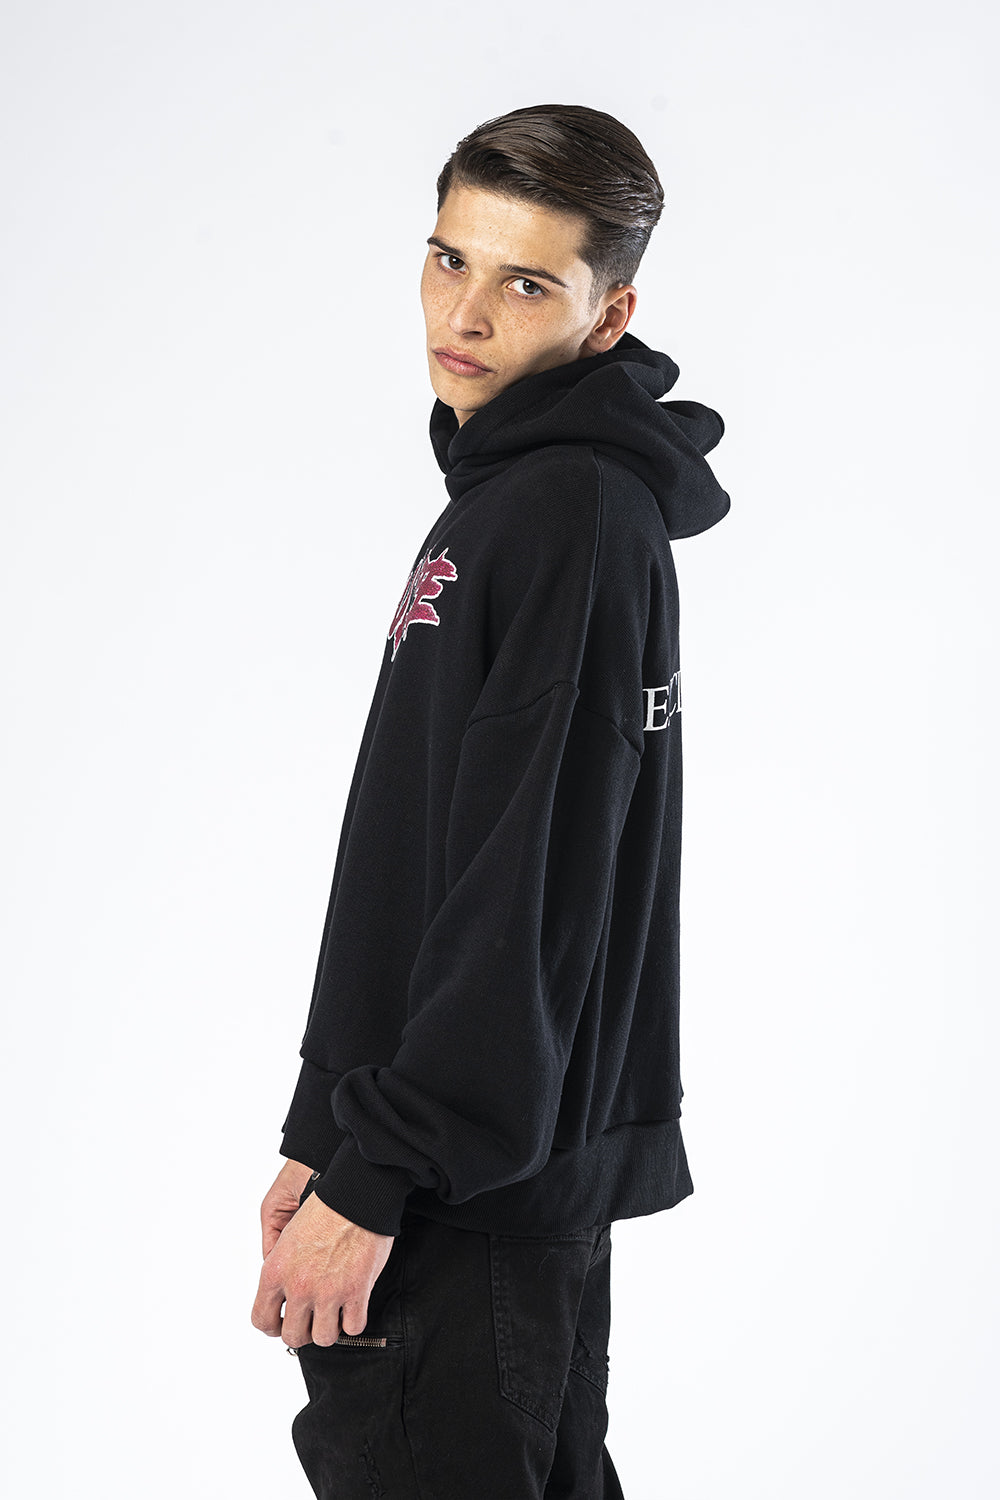 Black hooded sweatshirt with Culture Effemme Exclusive Lab print